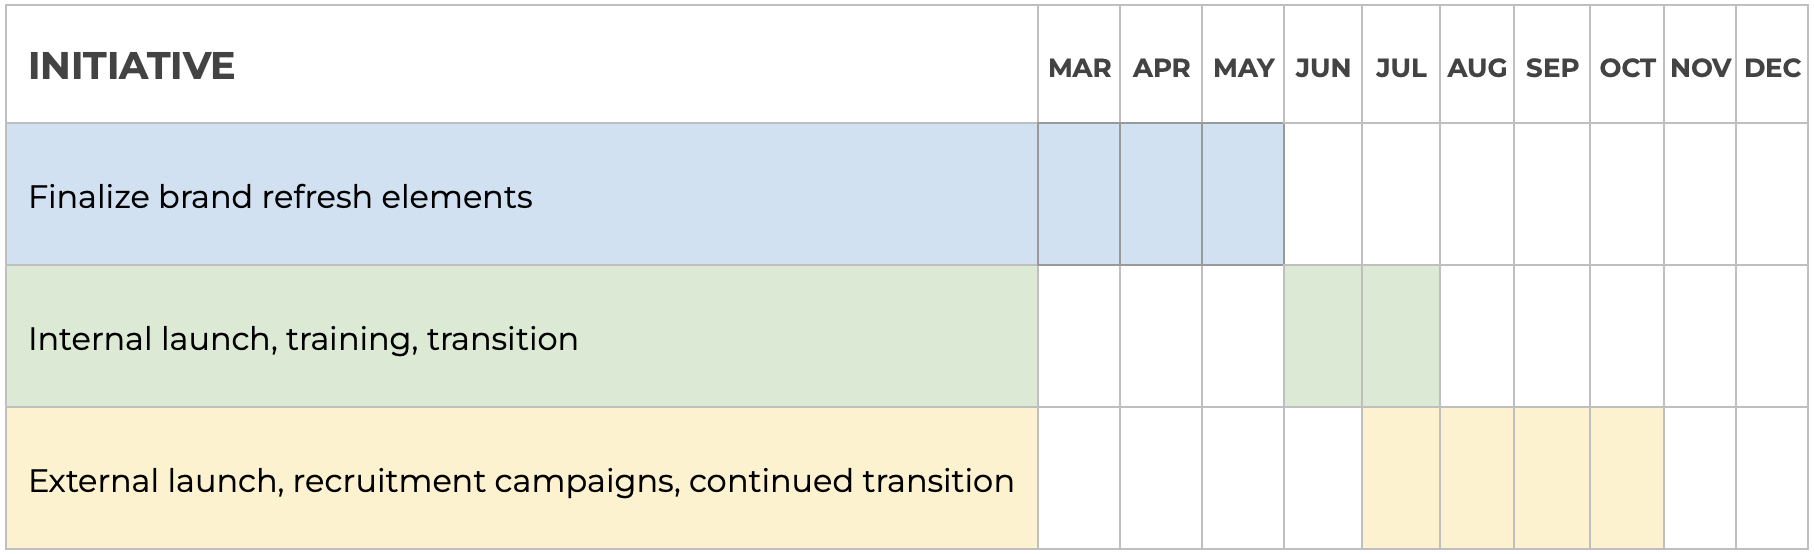 Timeline in table